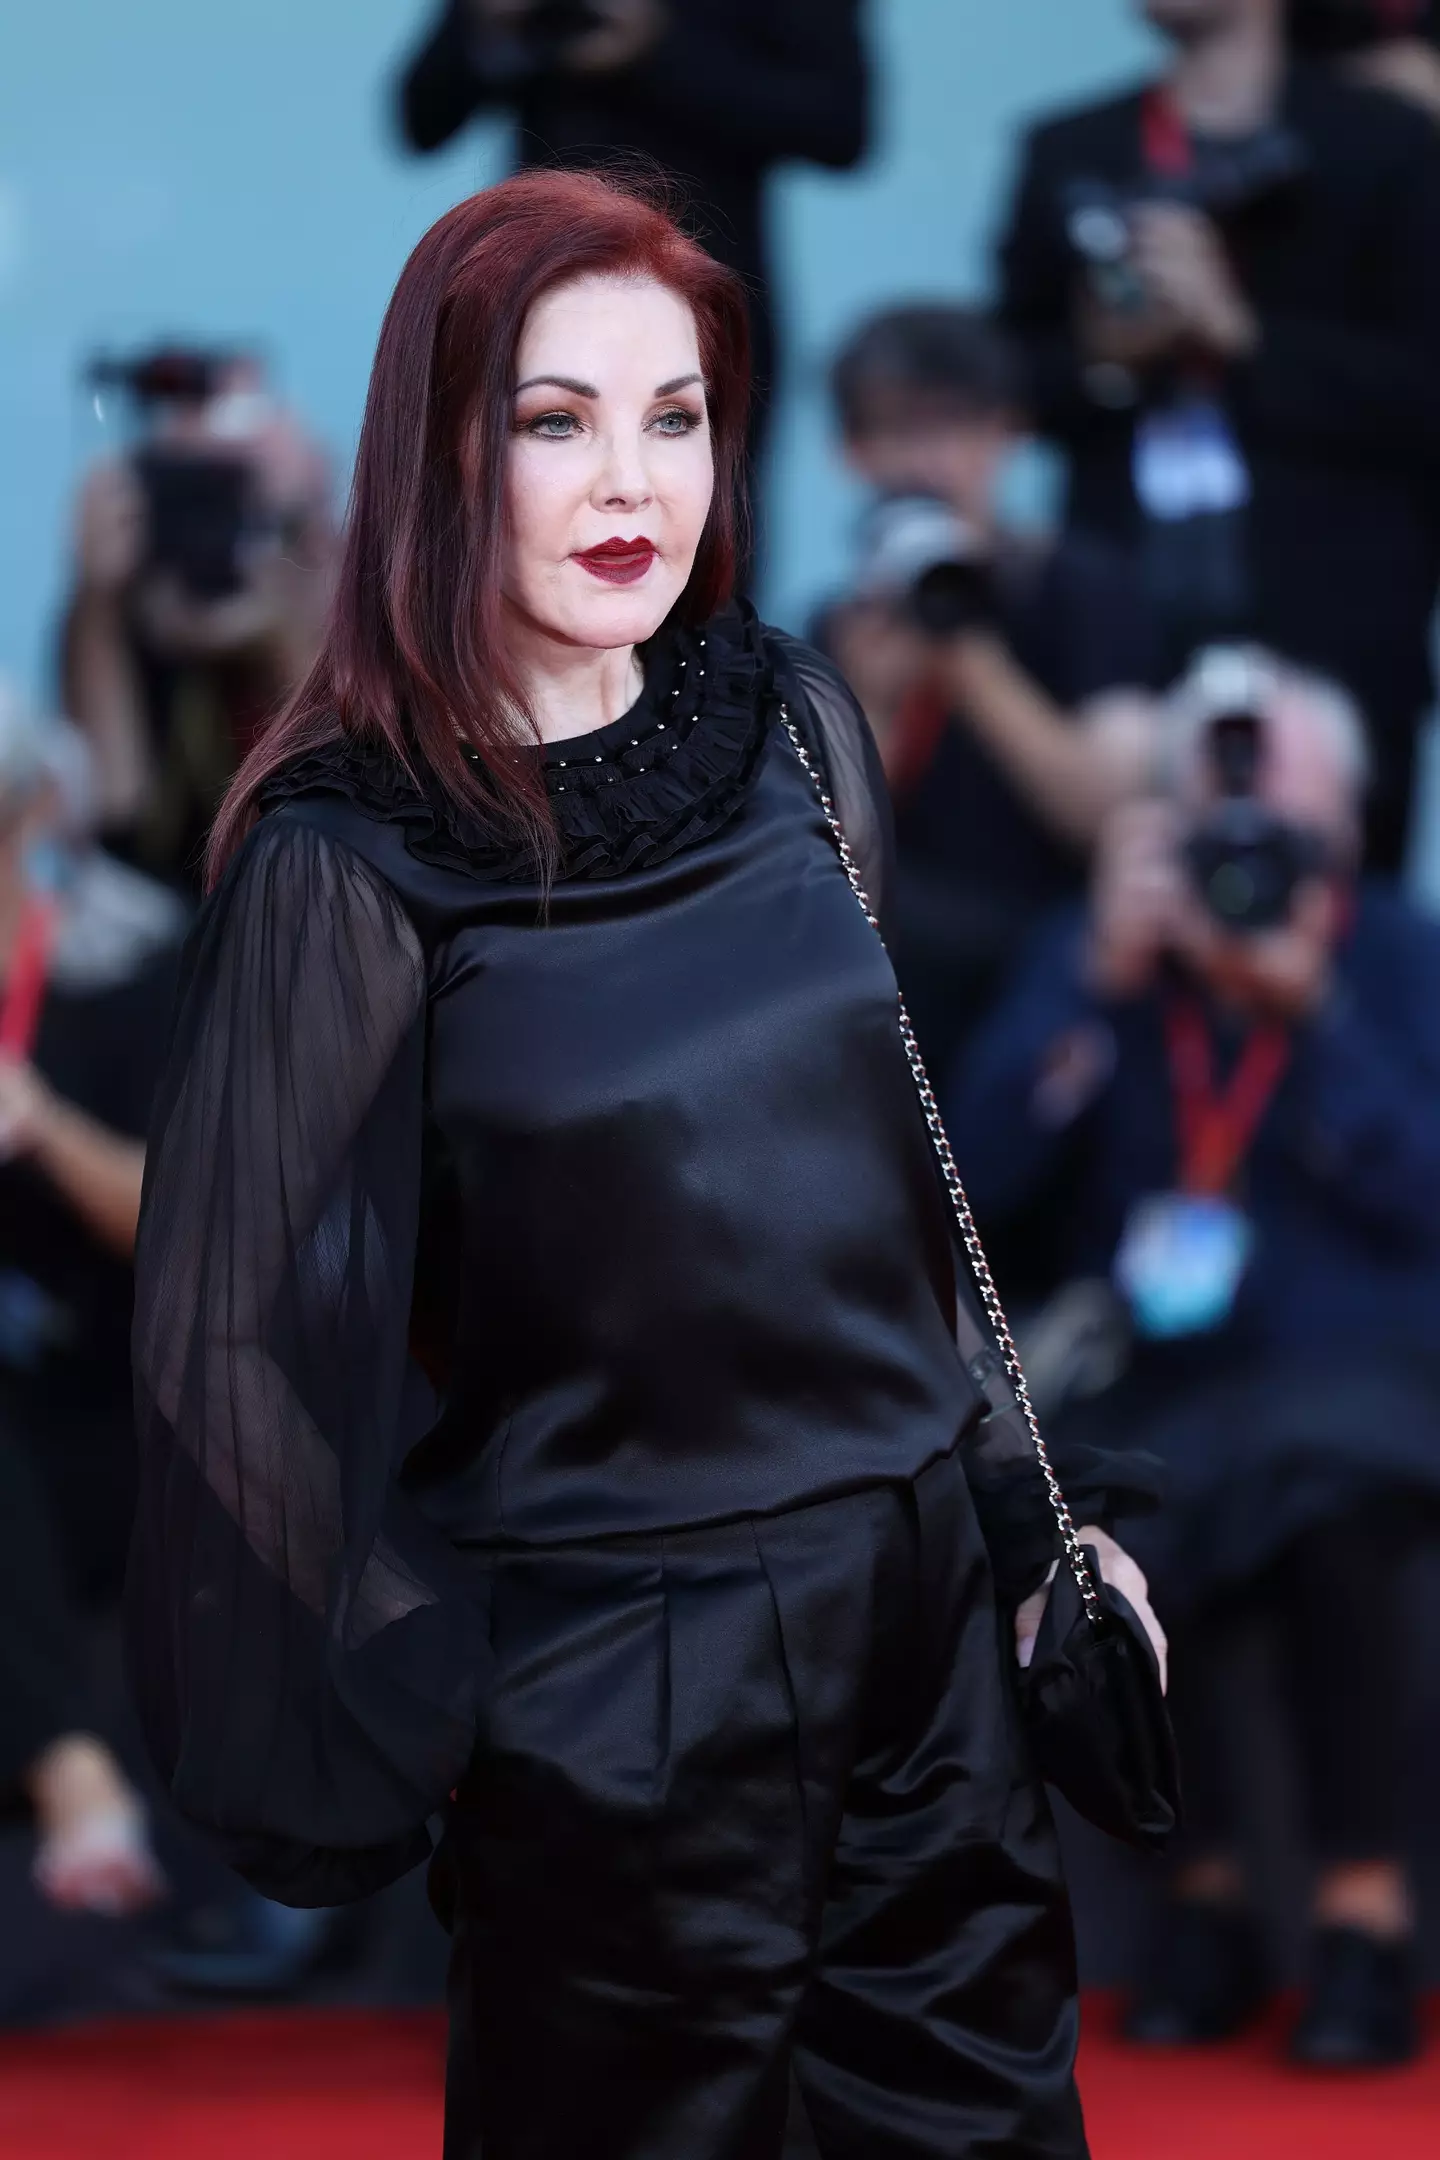 Priscilla Presley found the biopic about her difficult to watch.